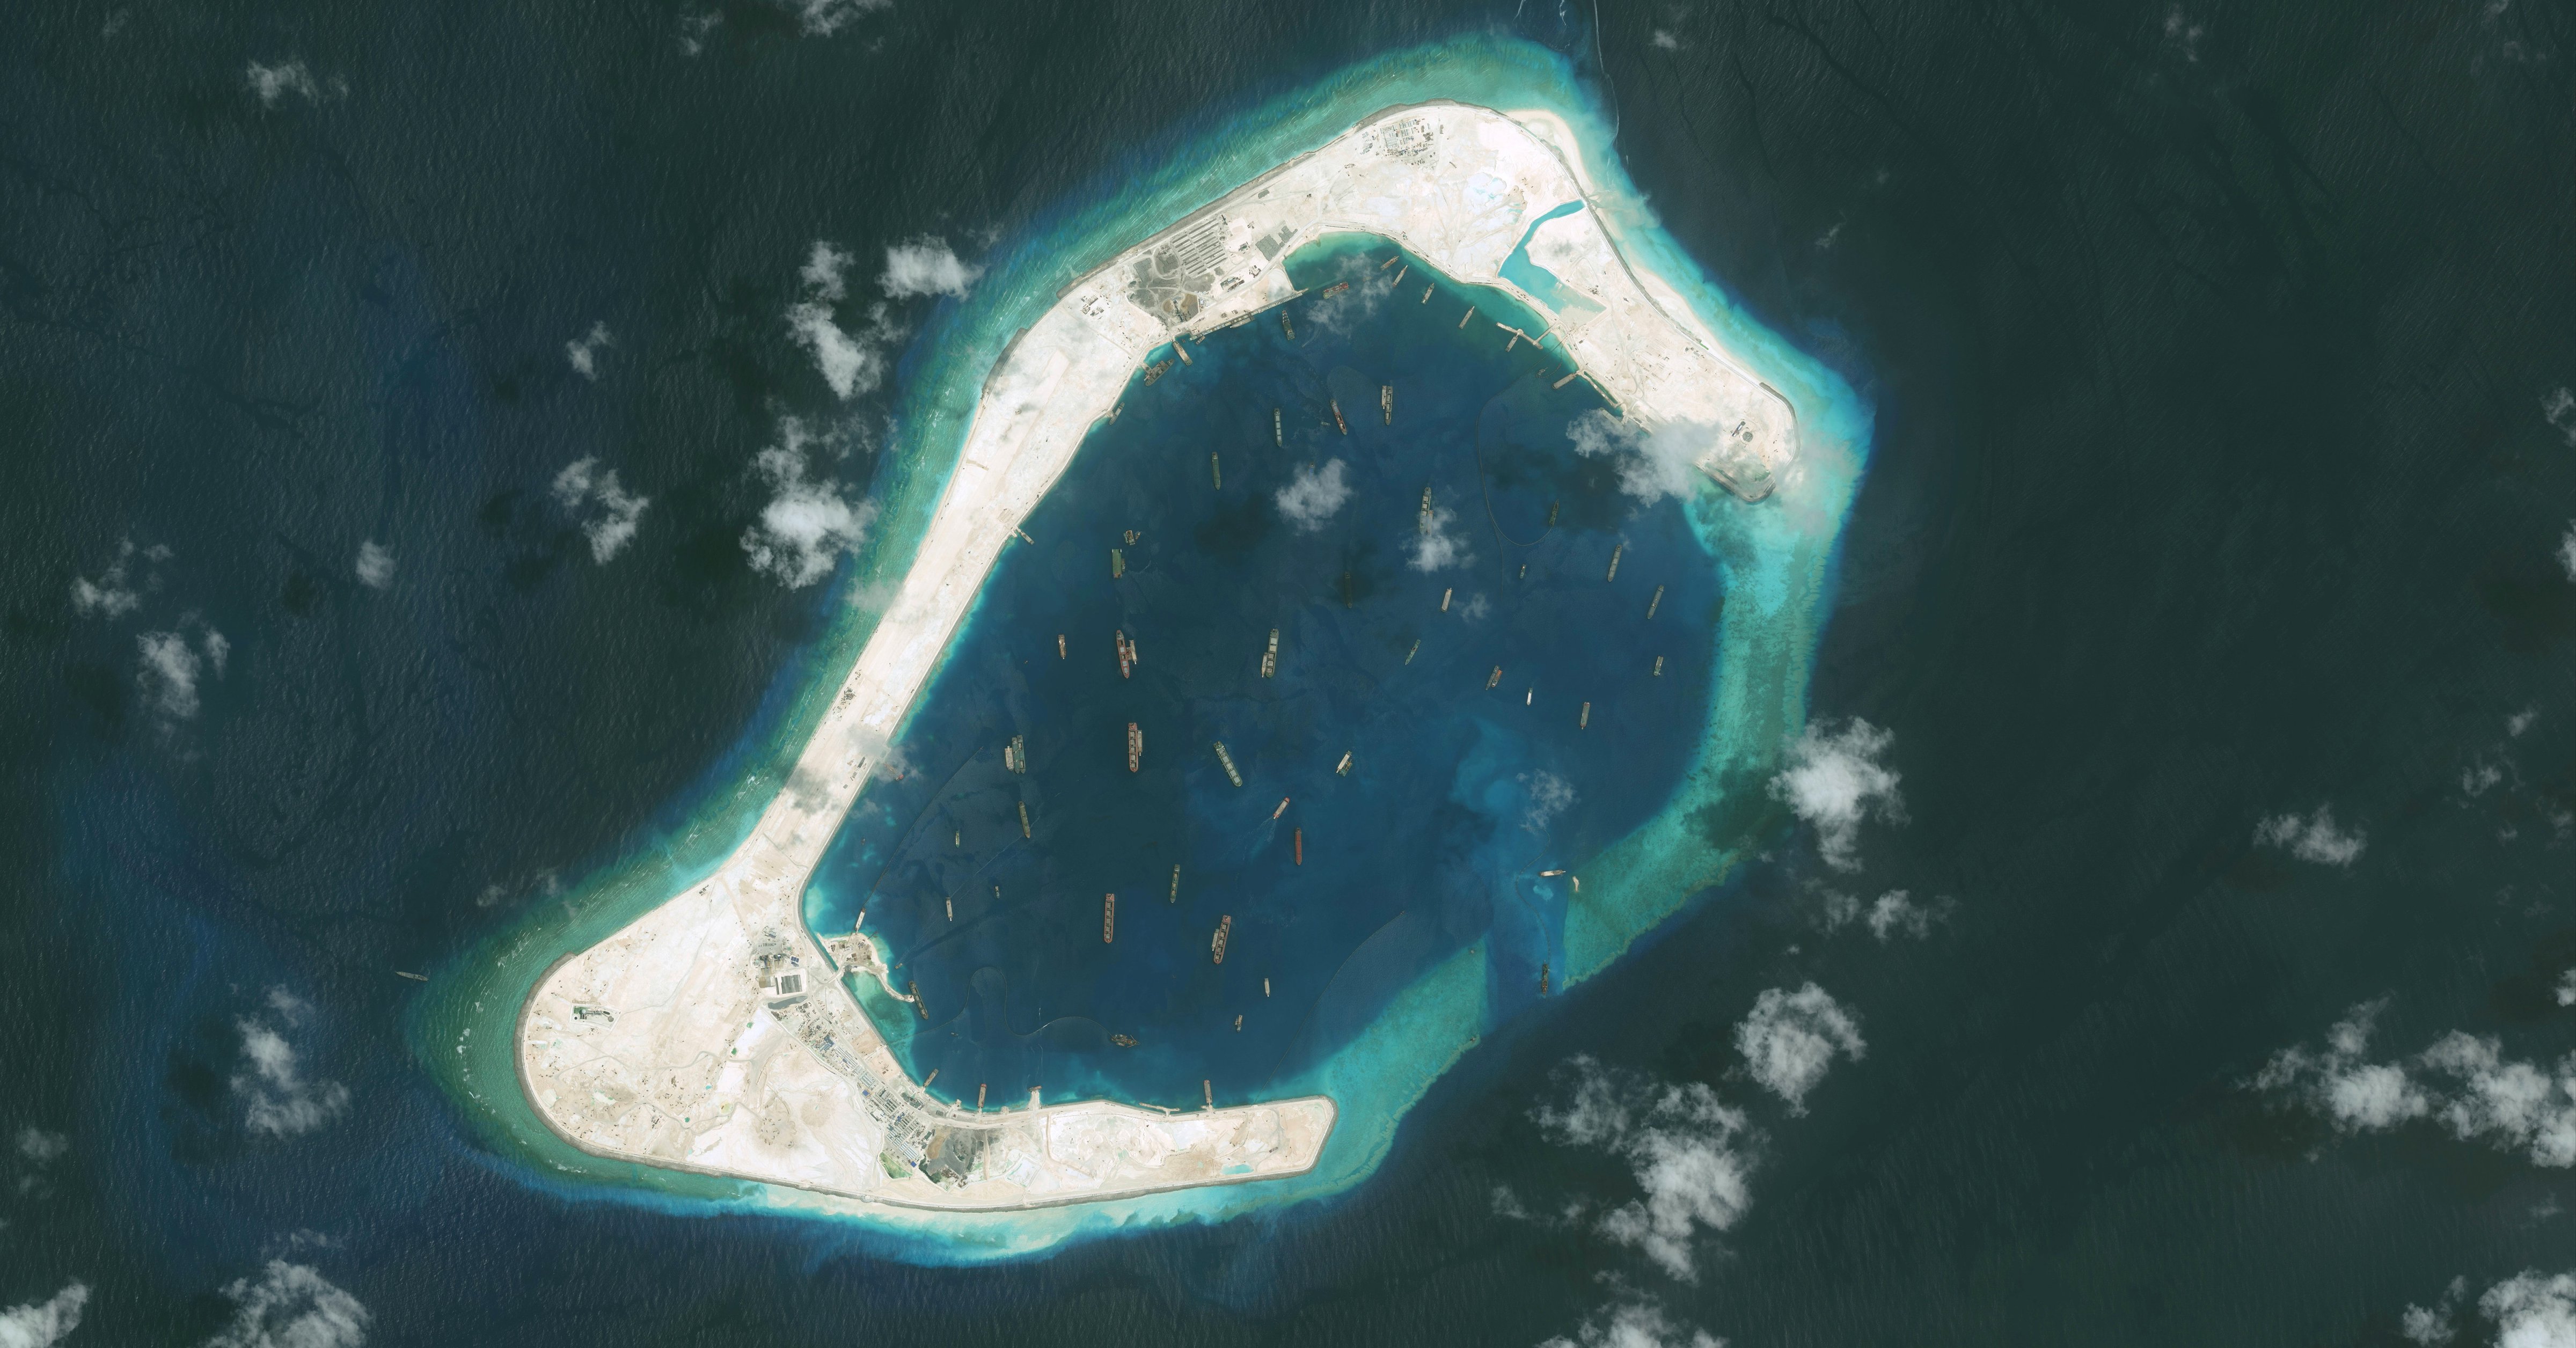 DigitalGlobe imagery of the Subi Reef in the South China Sea, a part of the Spratly Islands group. Photo DigitalGlobe via Getty Images.